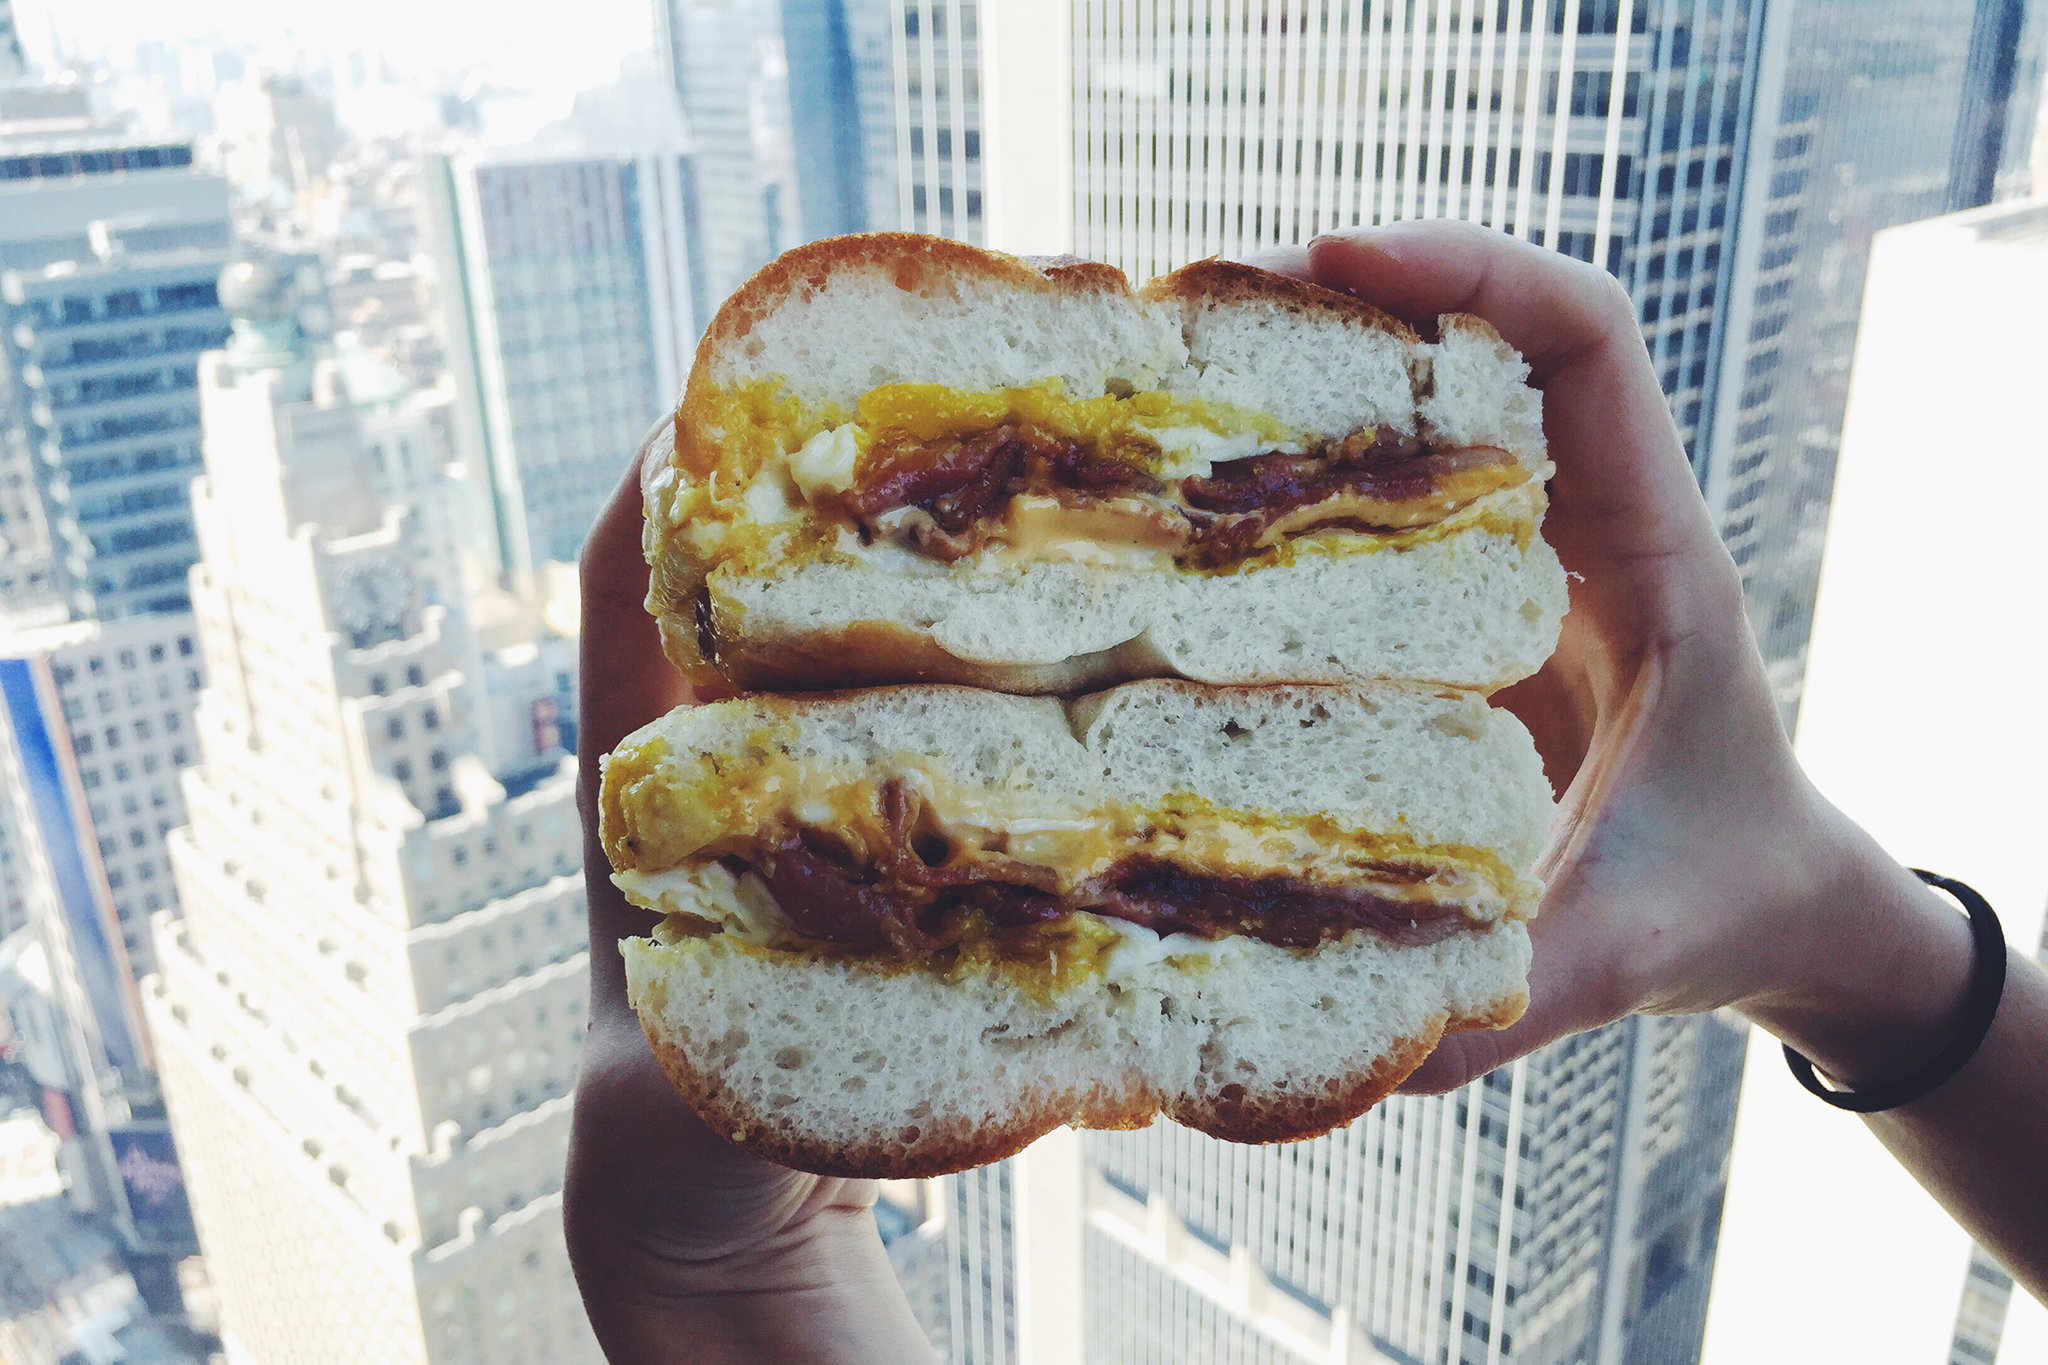 Bacon, Egg, and Cheese Sandwich Recipe (New York-Style)